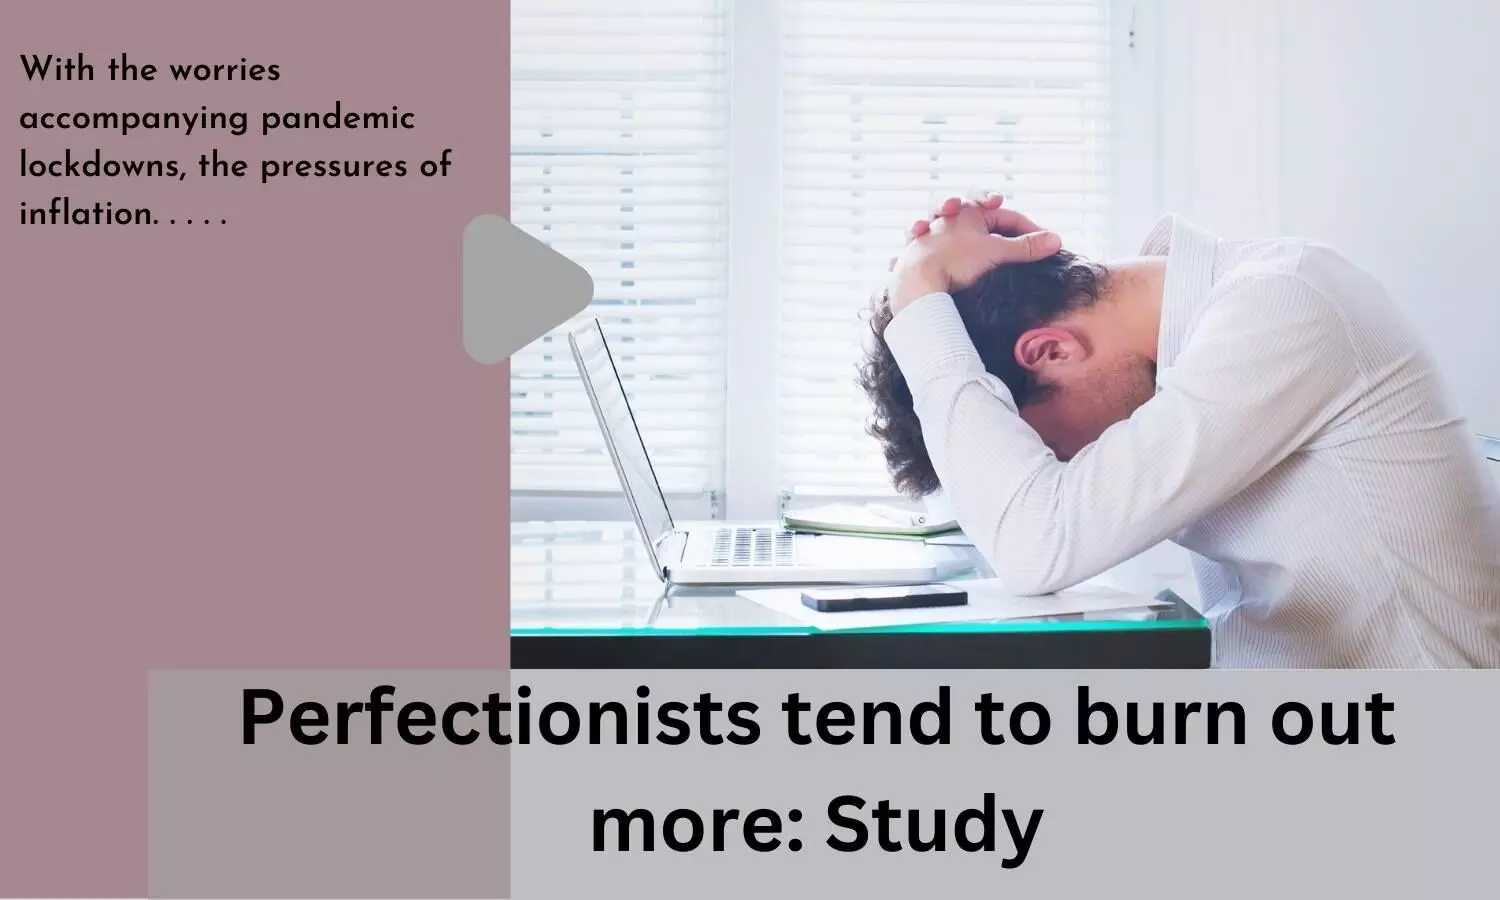 Perfectionists tend to burn out more: Study